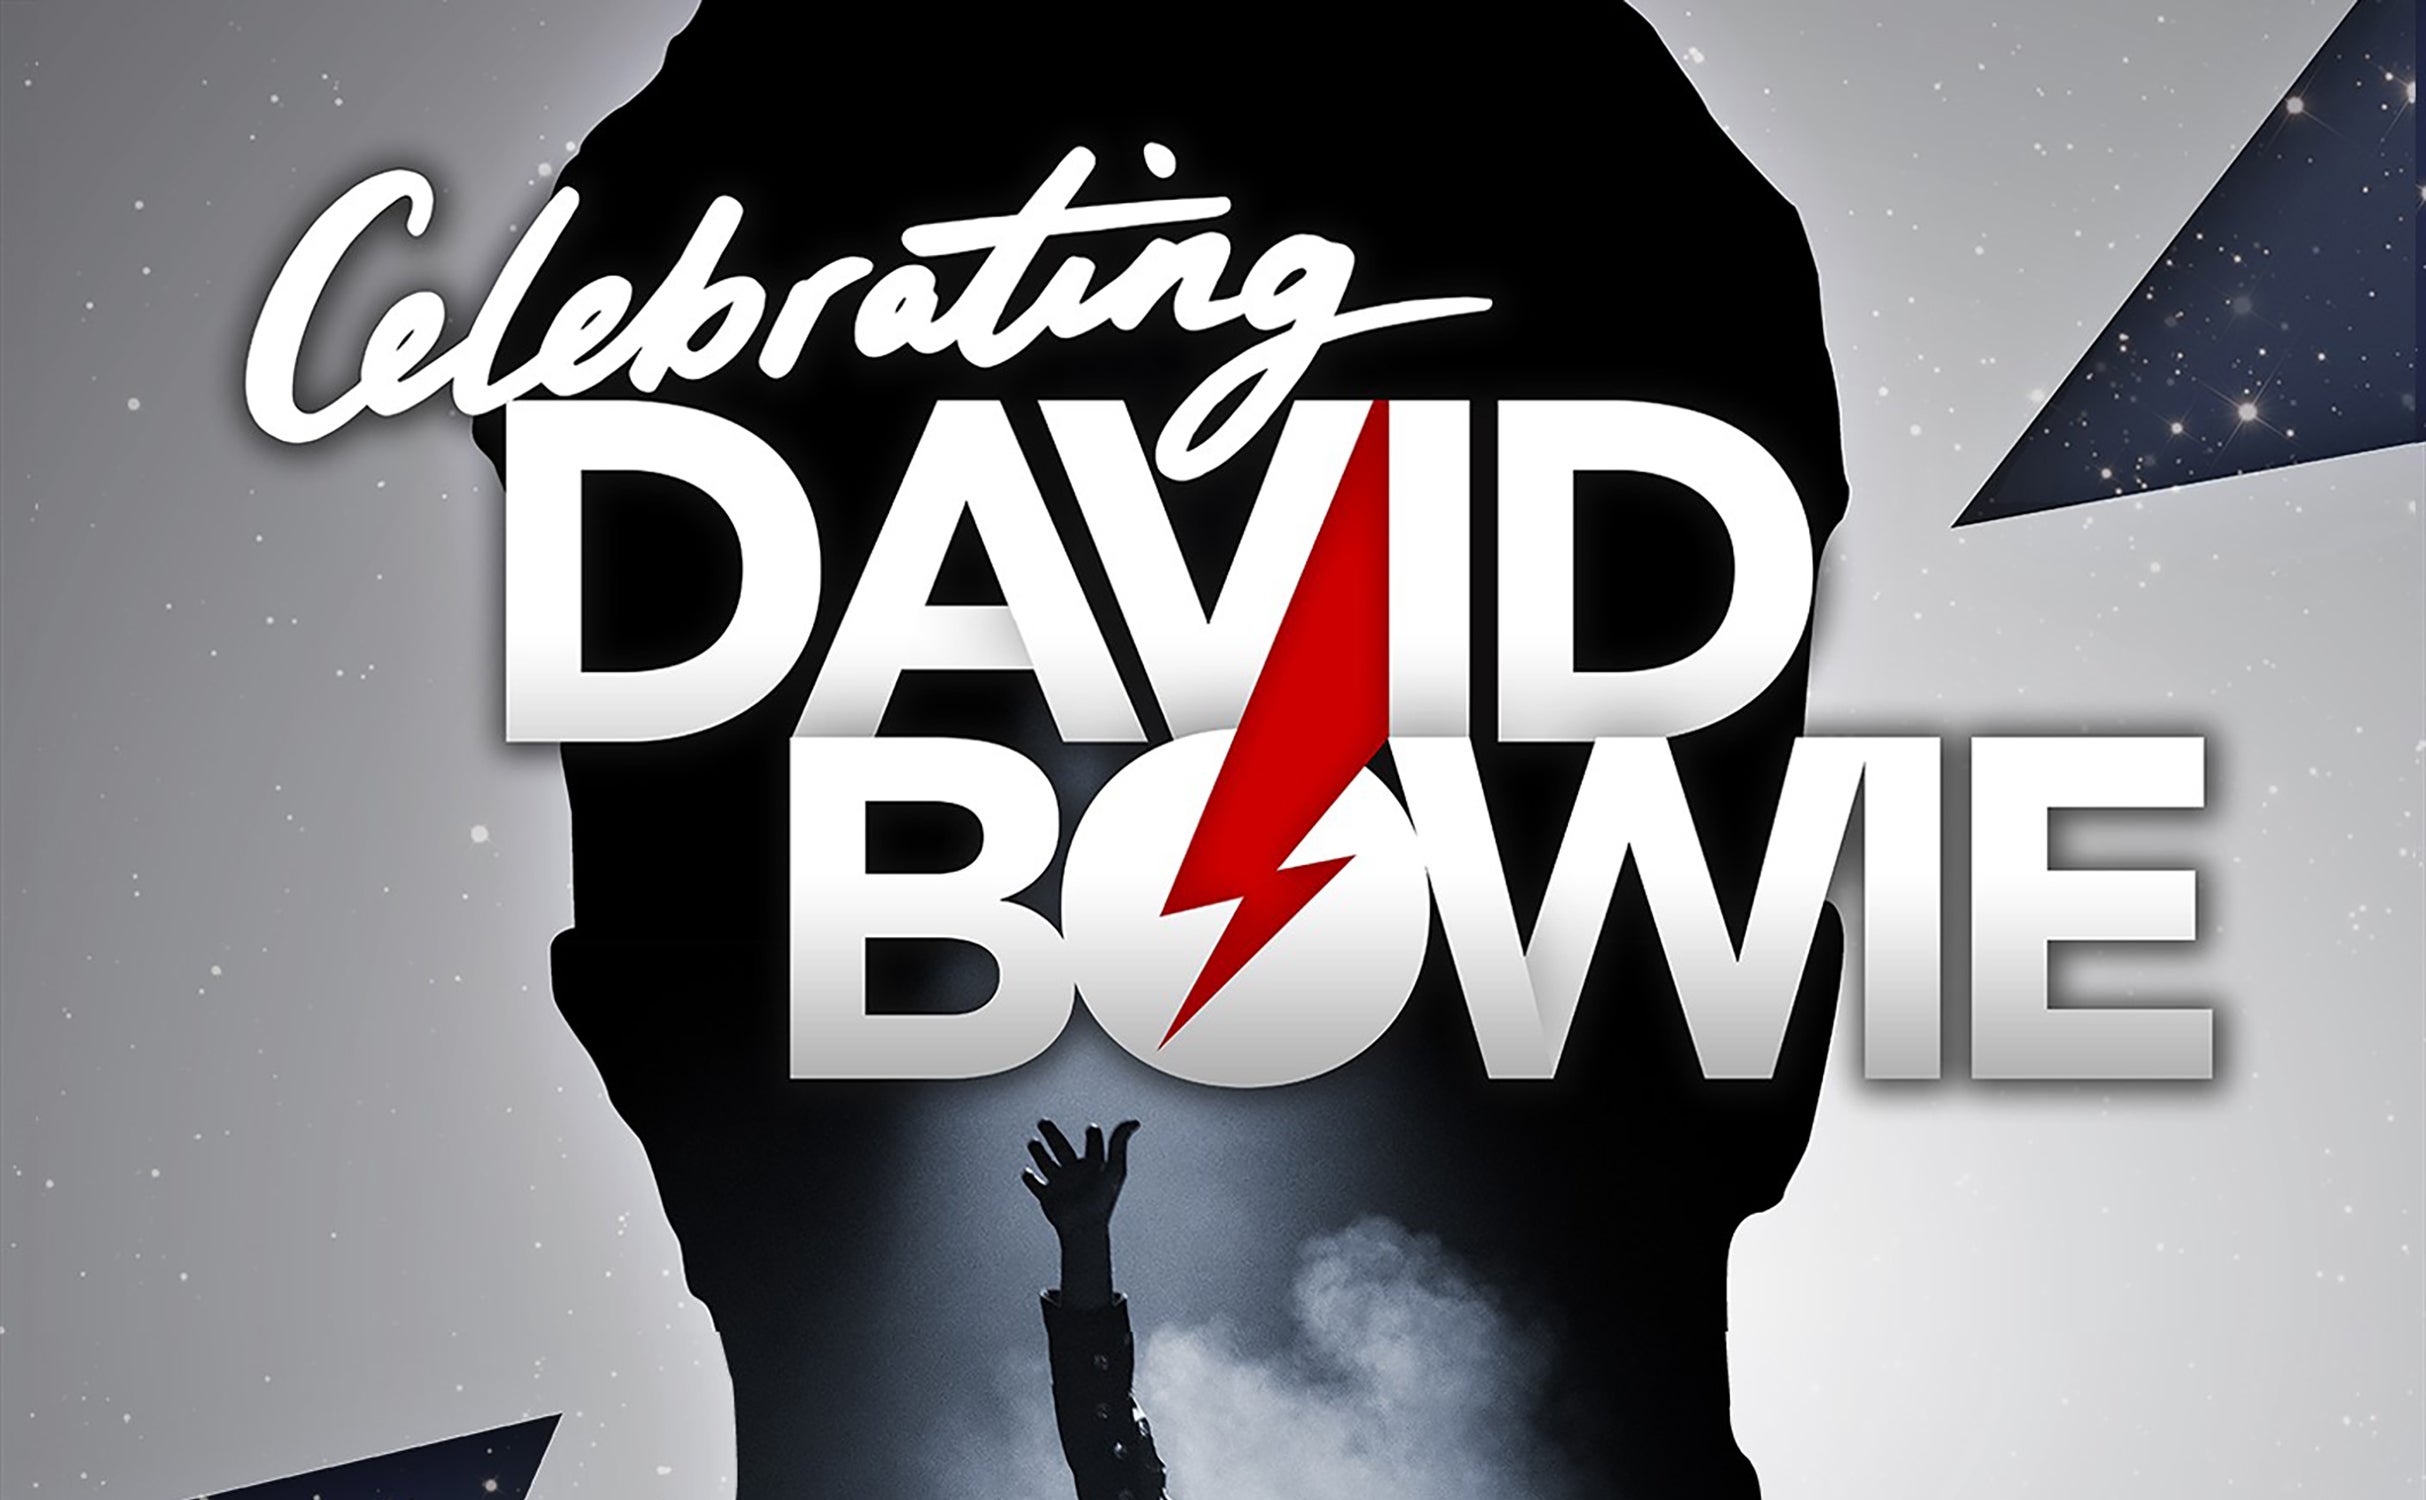 Celebrating David Bowie - Live in Concert  in Anaheim promo photo for Venue presale offer code